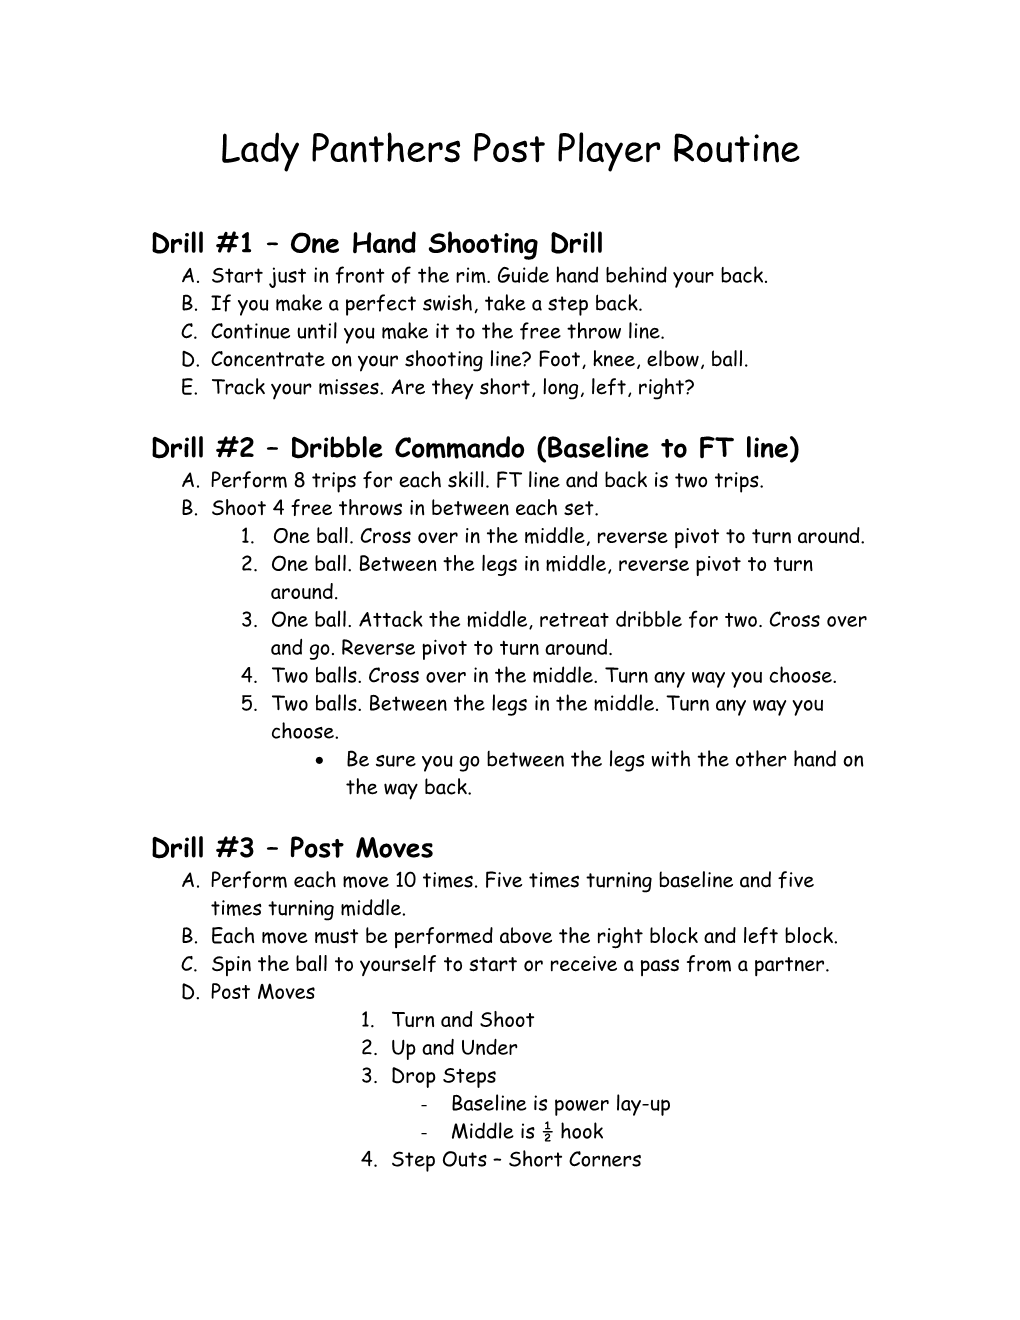 Lady Panther Open Gym Routine